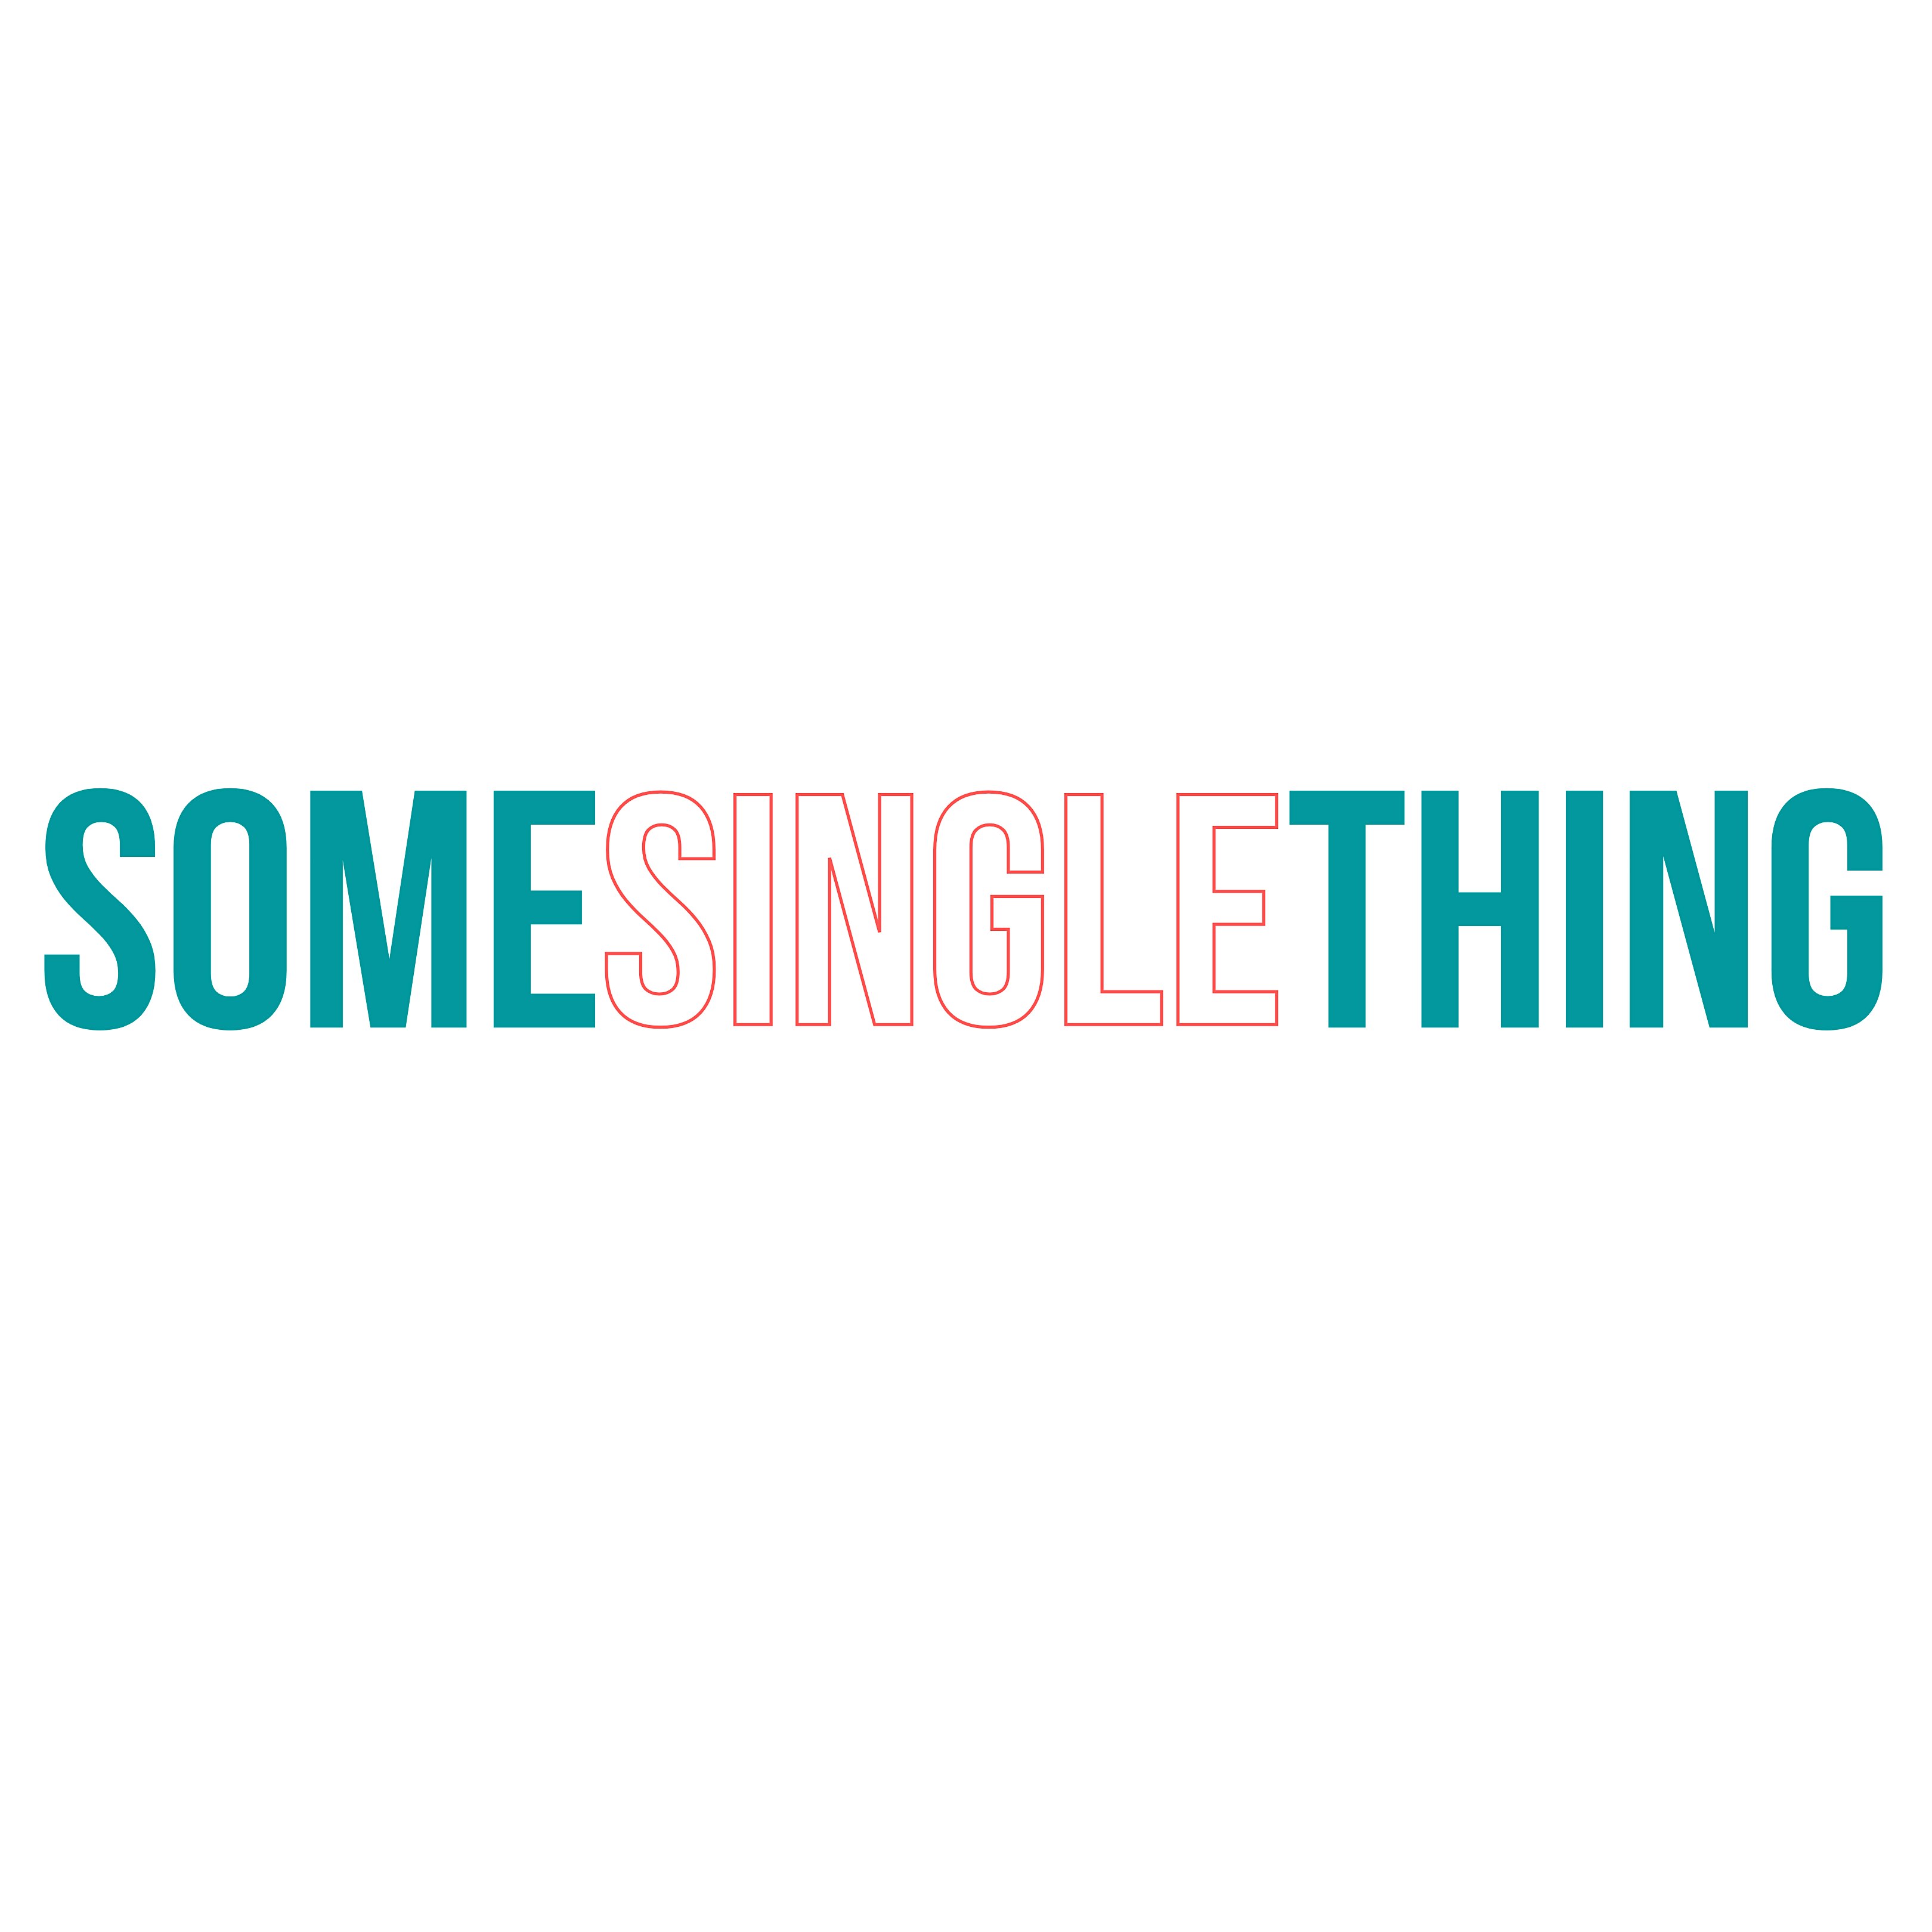 Some Single Thing